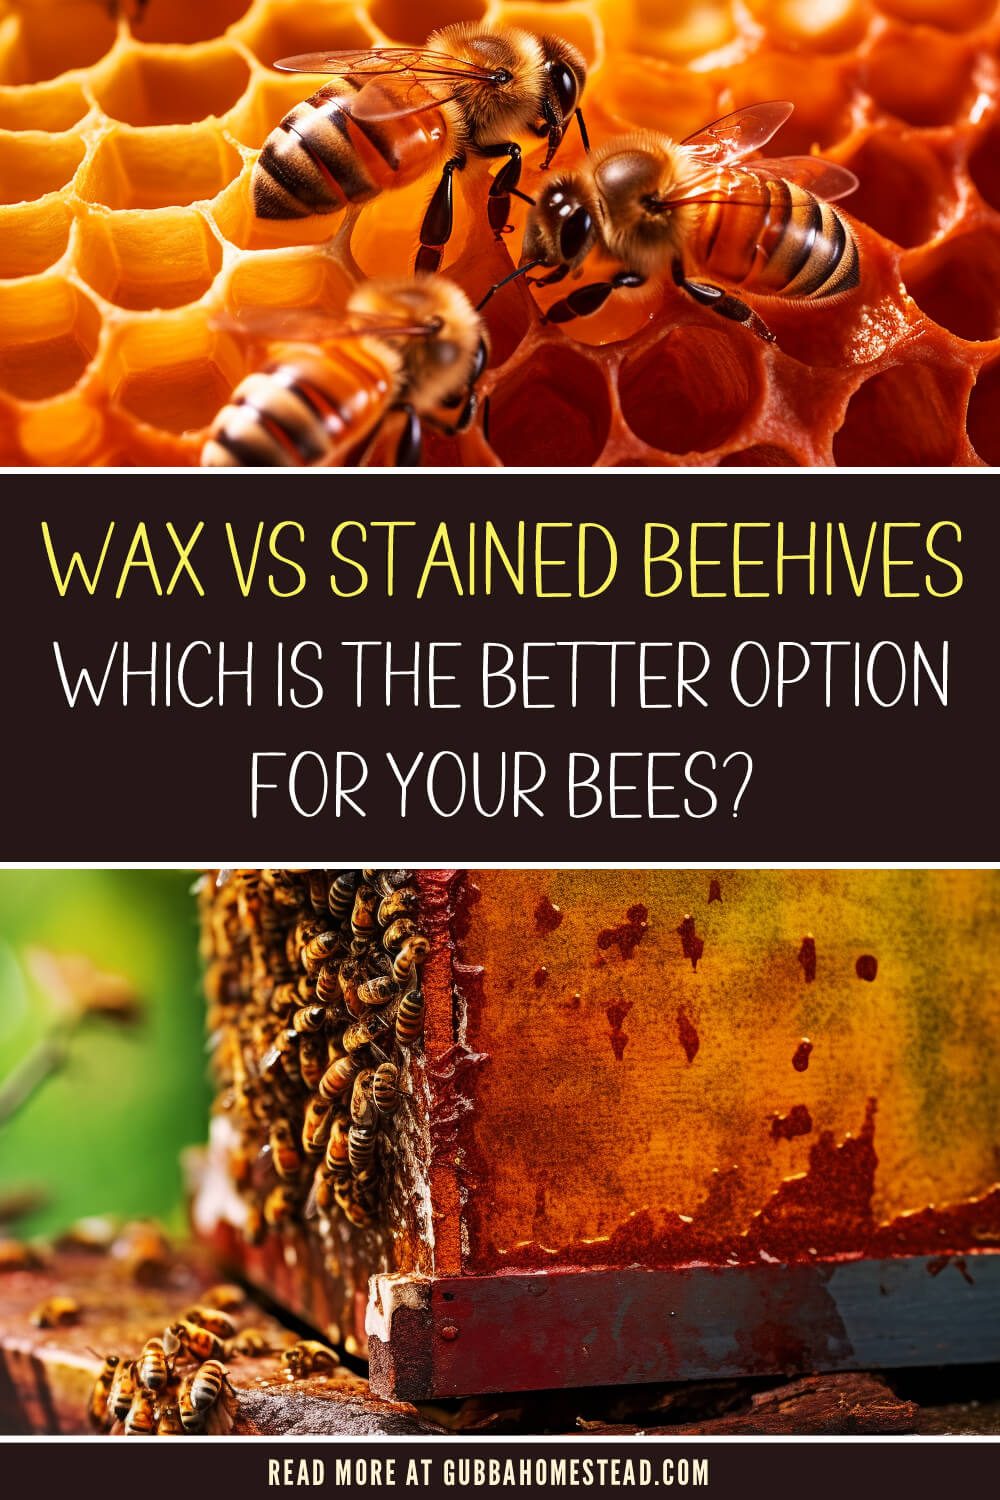 Wax vs Stained Beehives: Which is the Better Option for Your Bees?